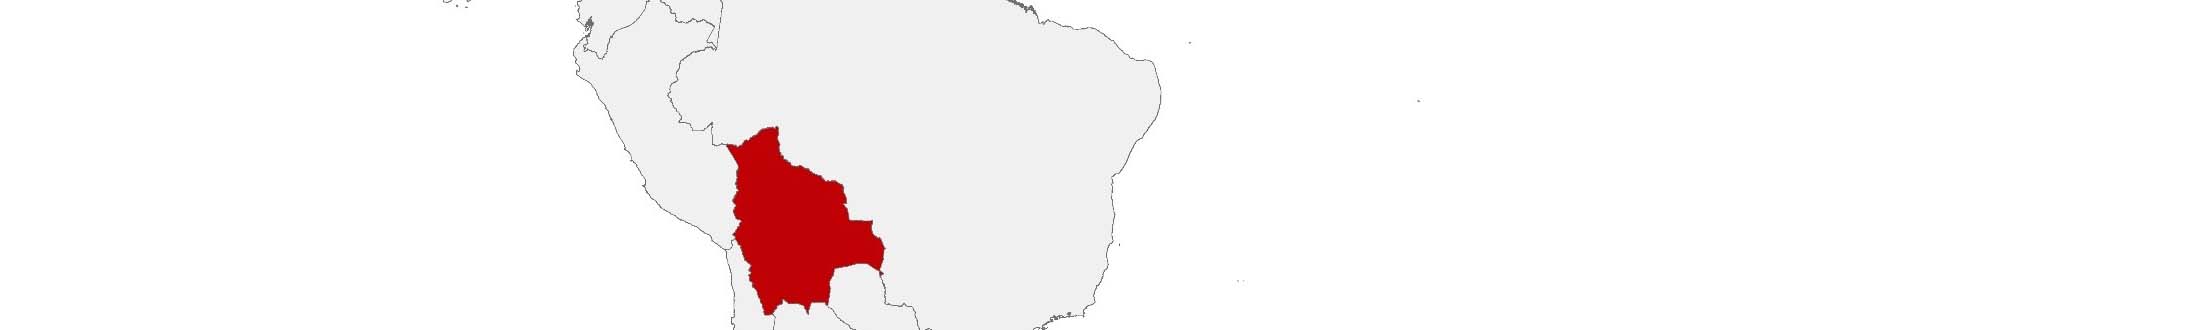 Purchasing power data and socio-demographic data can be displayed on a map of Bolivia using the following area boundaries: Departamentos and Municipios.